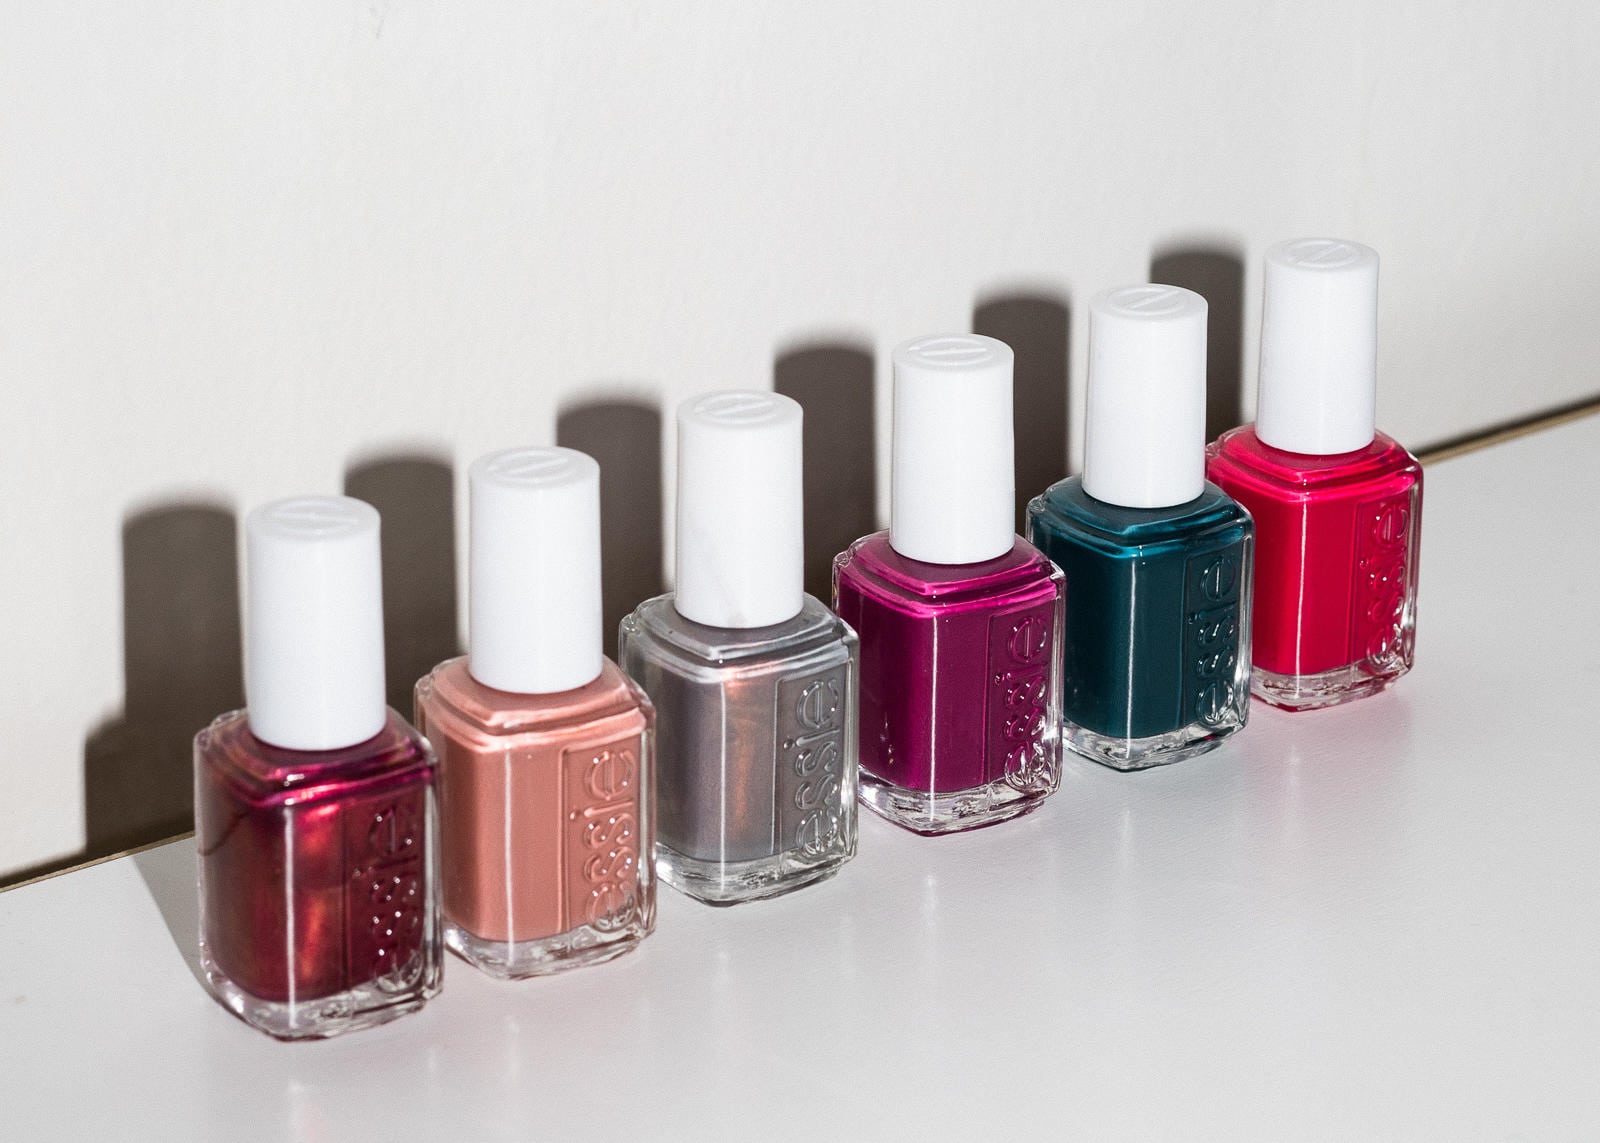 Essie Winter Nail Polish Collection - The Girl From Panama